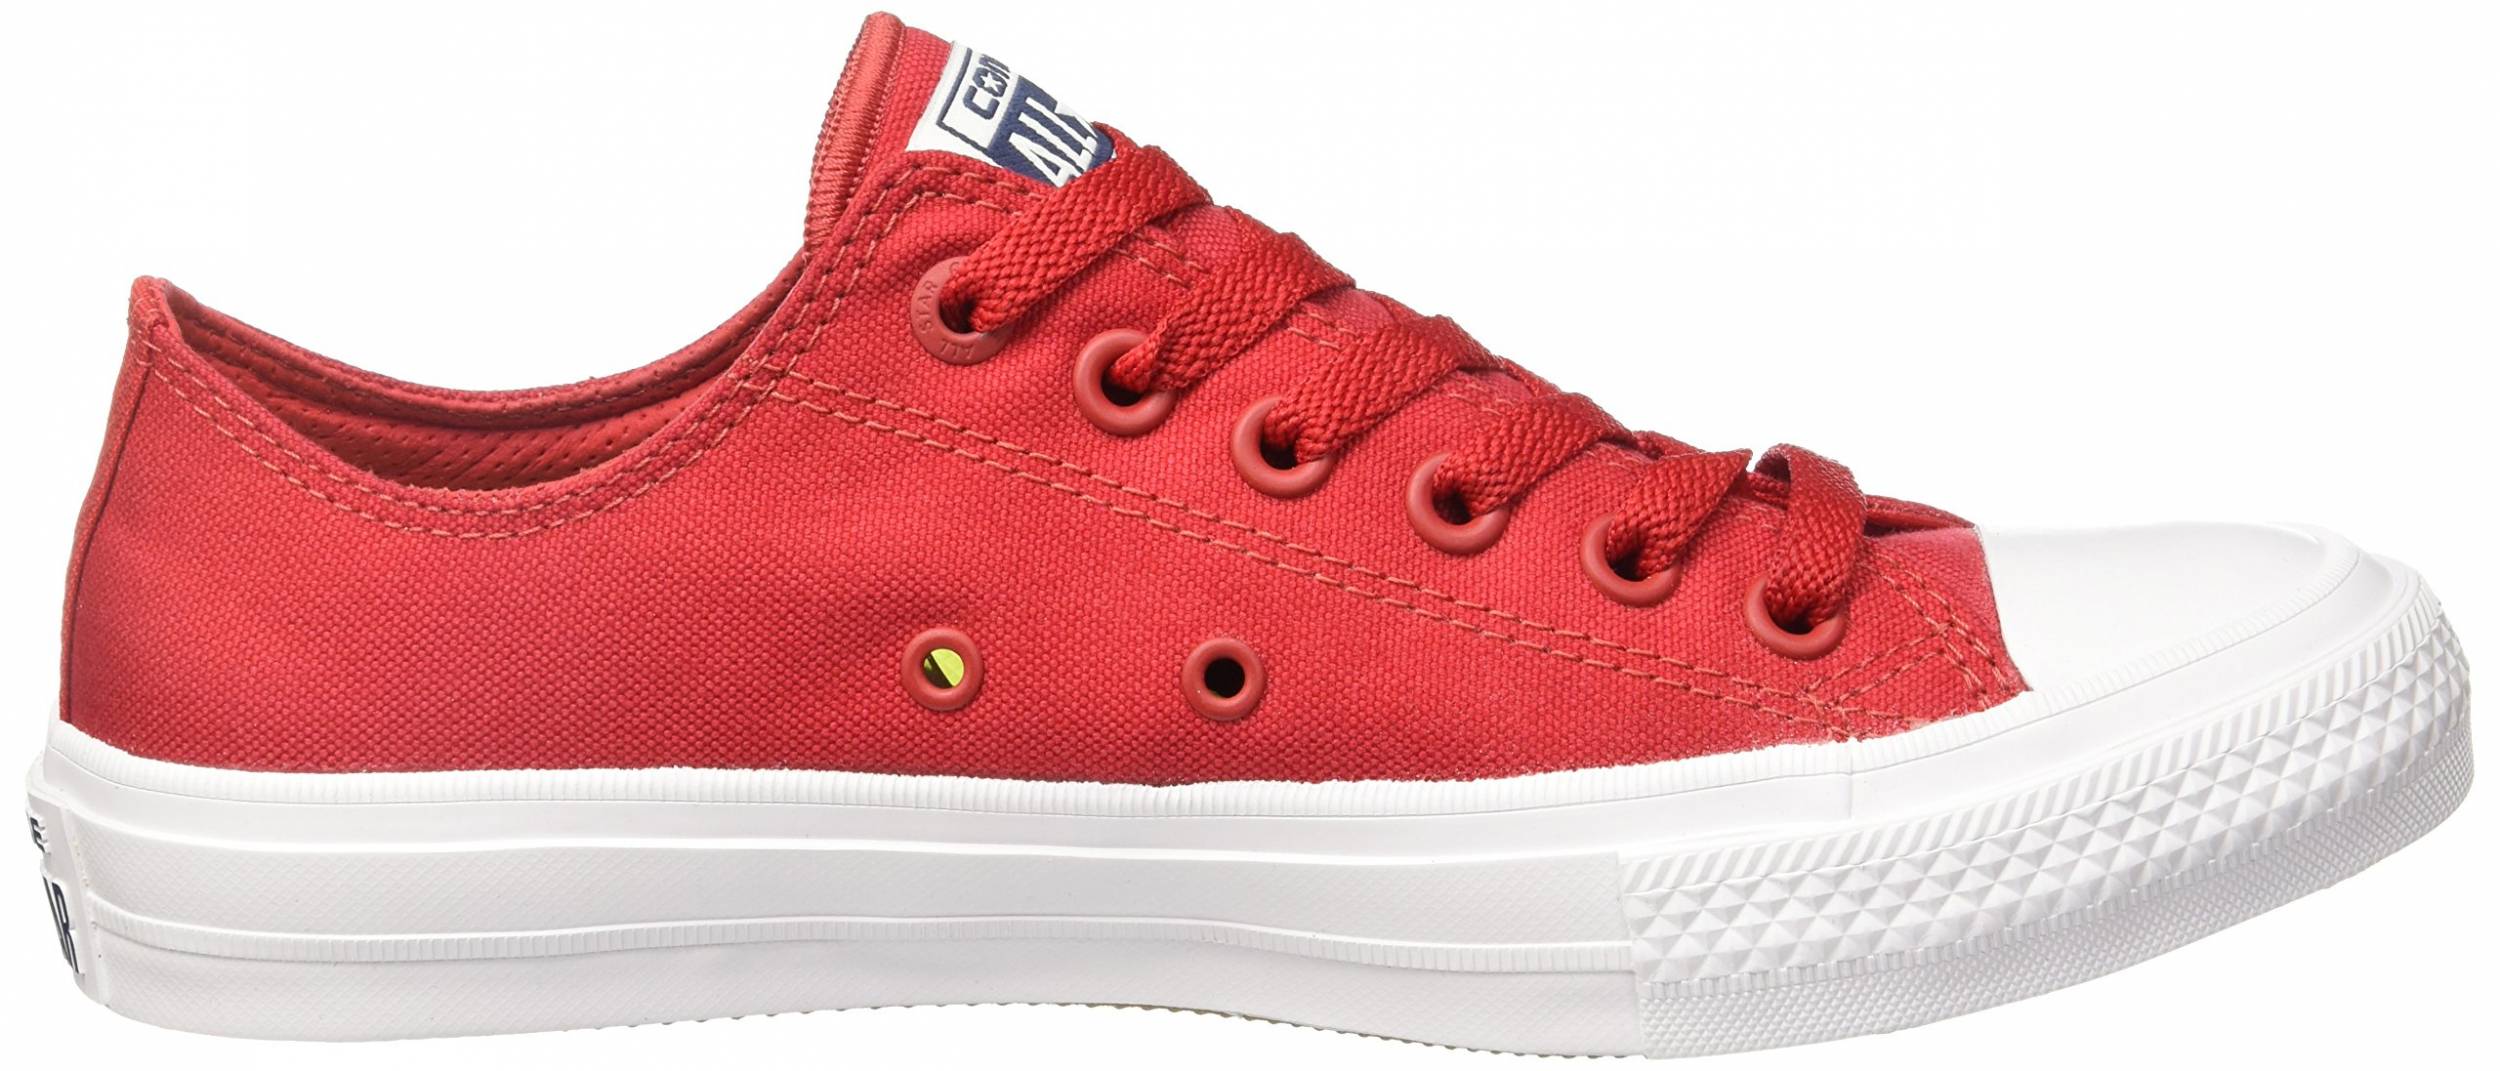 red converse adults